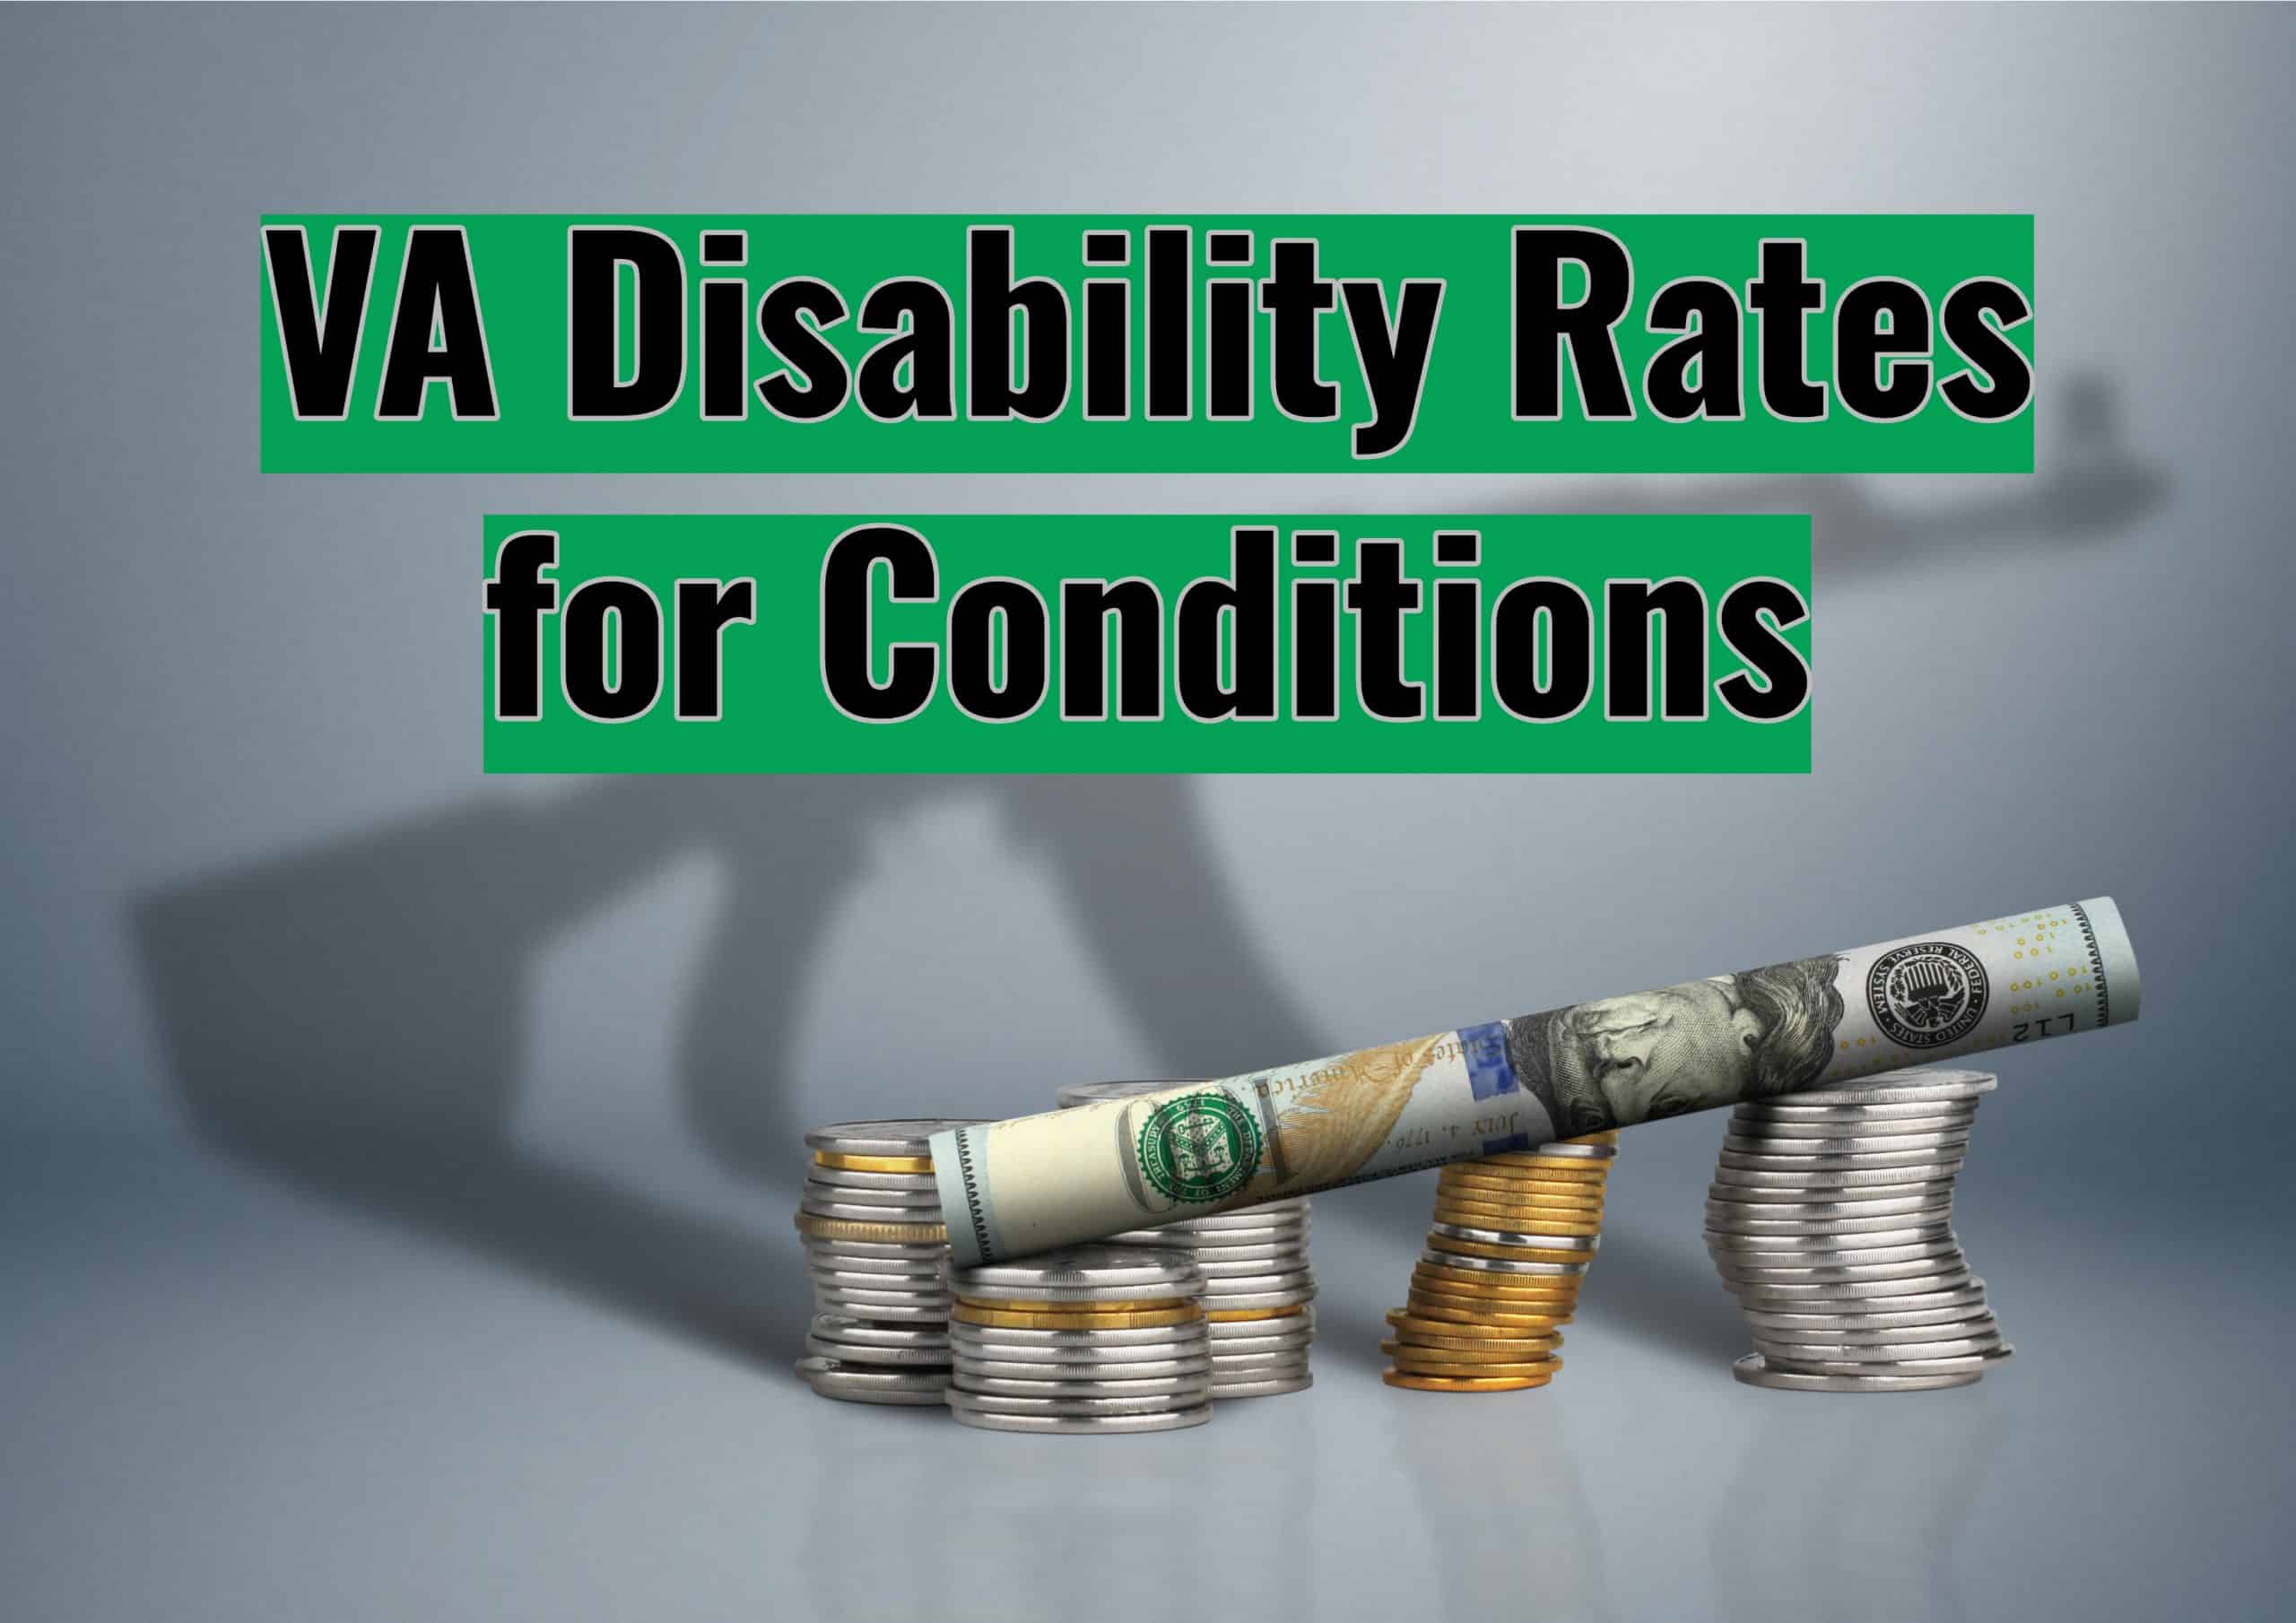 VA Disability Rates for Conditions